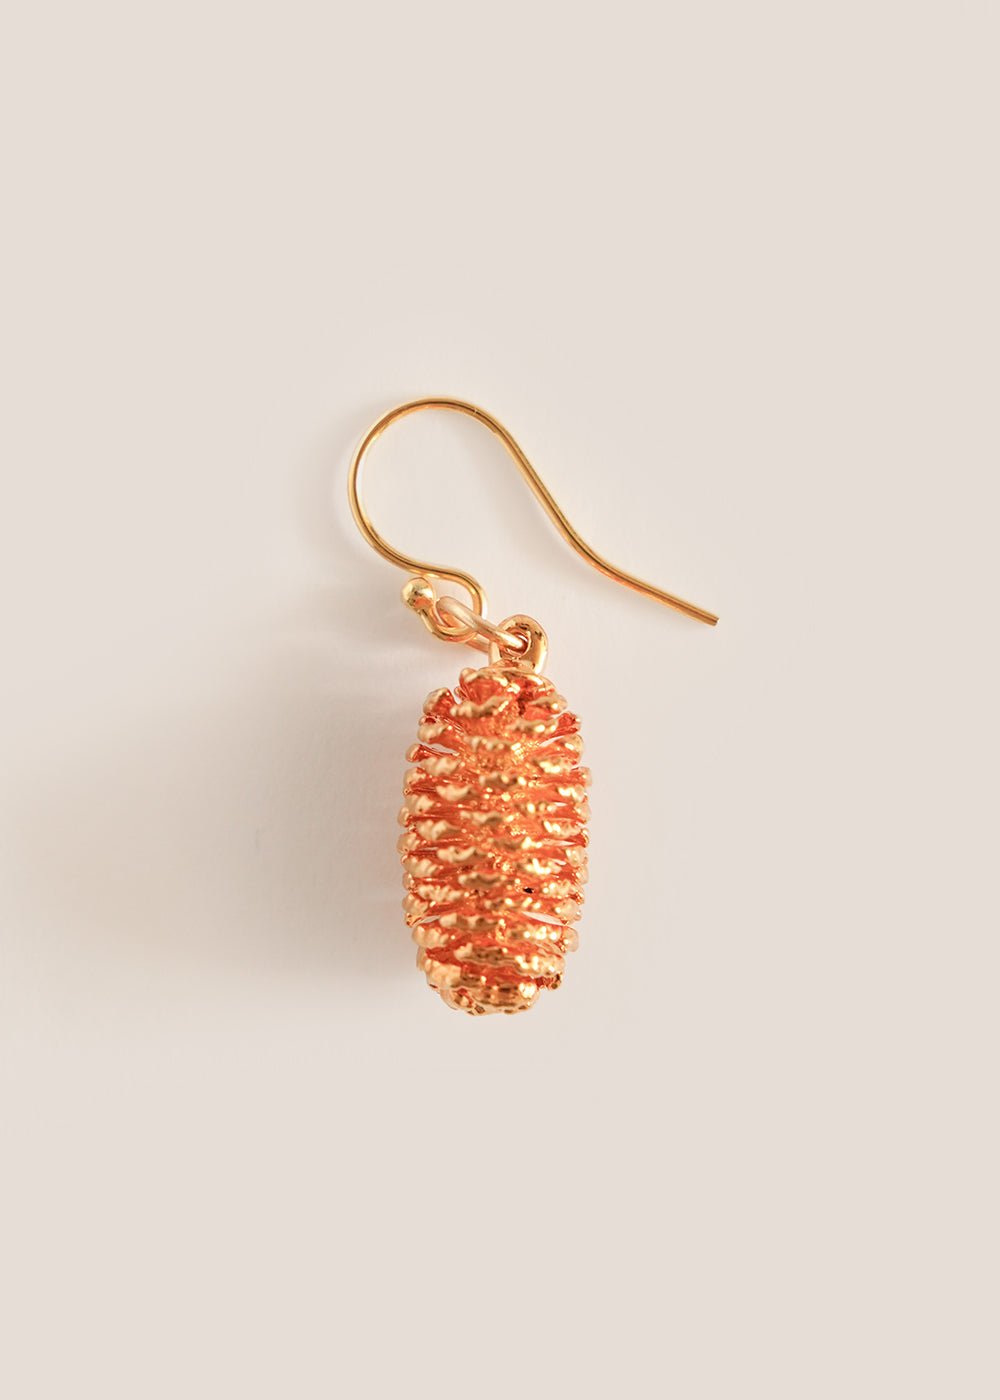 Dauphinette Baby Pinecone Earring - New Classics Studios Sustainable Ethical Fashion Canada